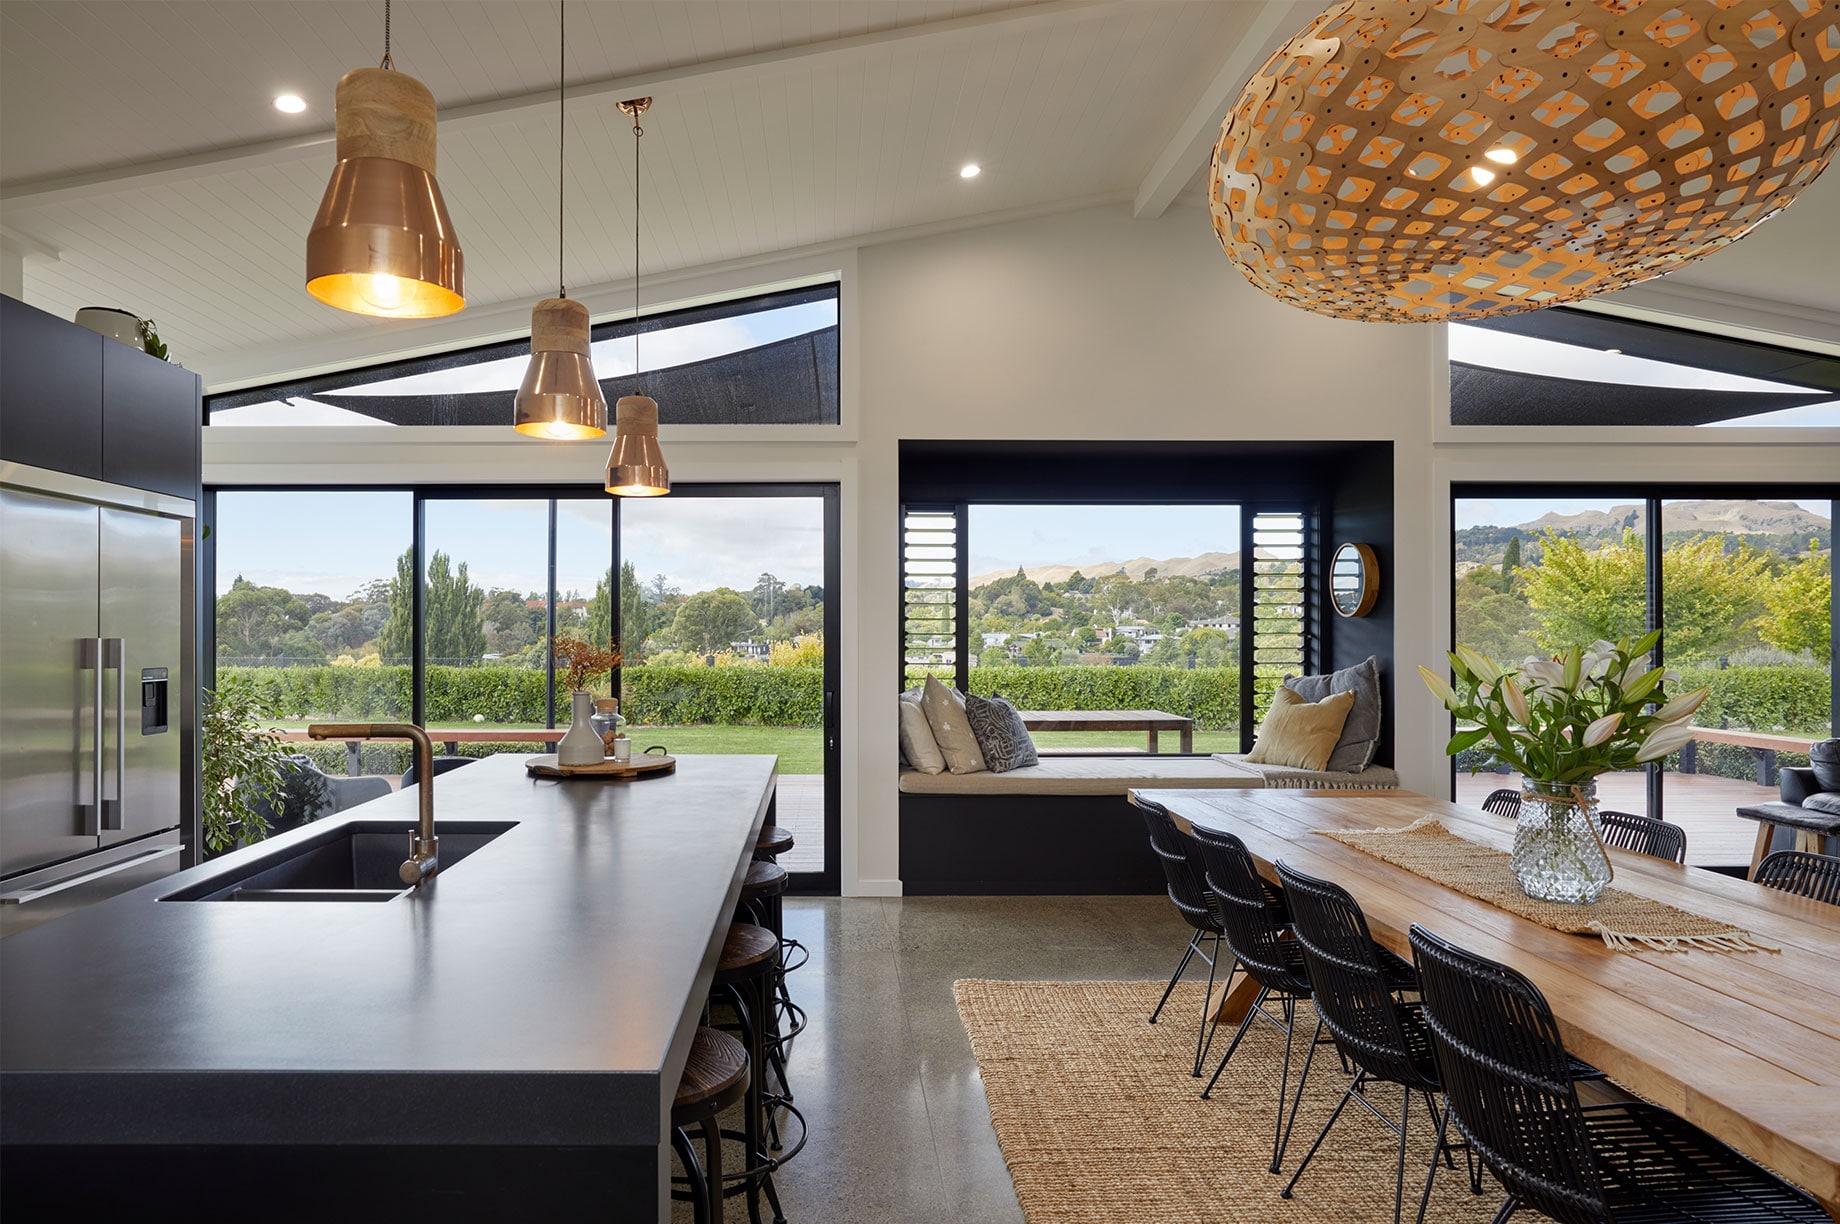 Large kitchen and dining area with a view overlooking trees